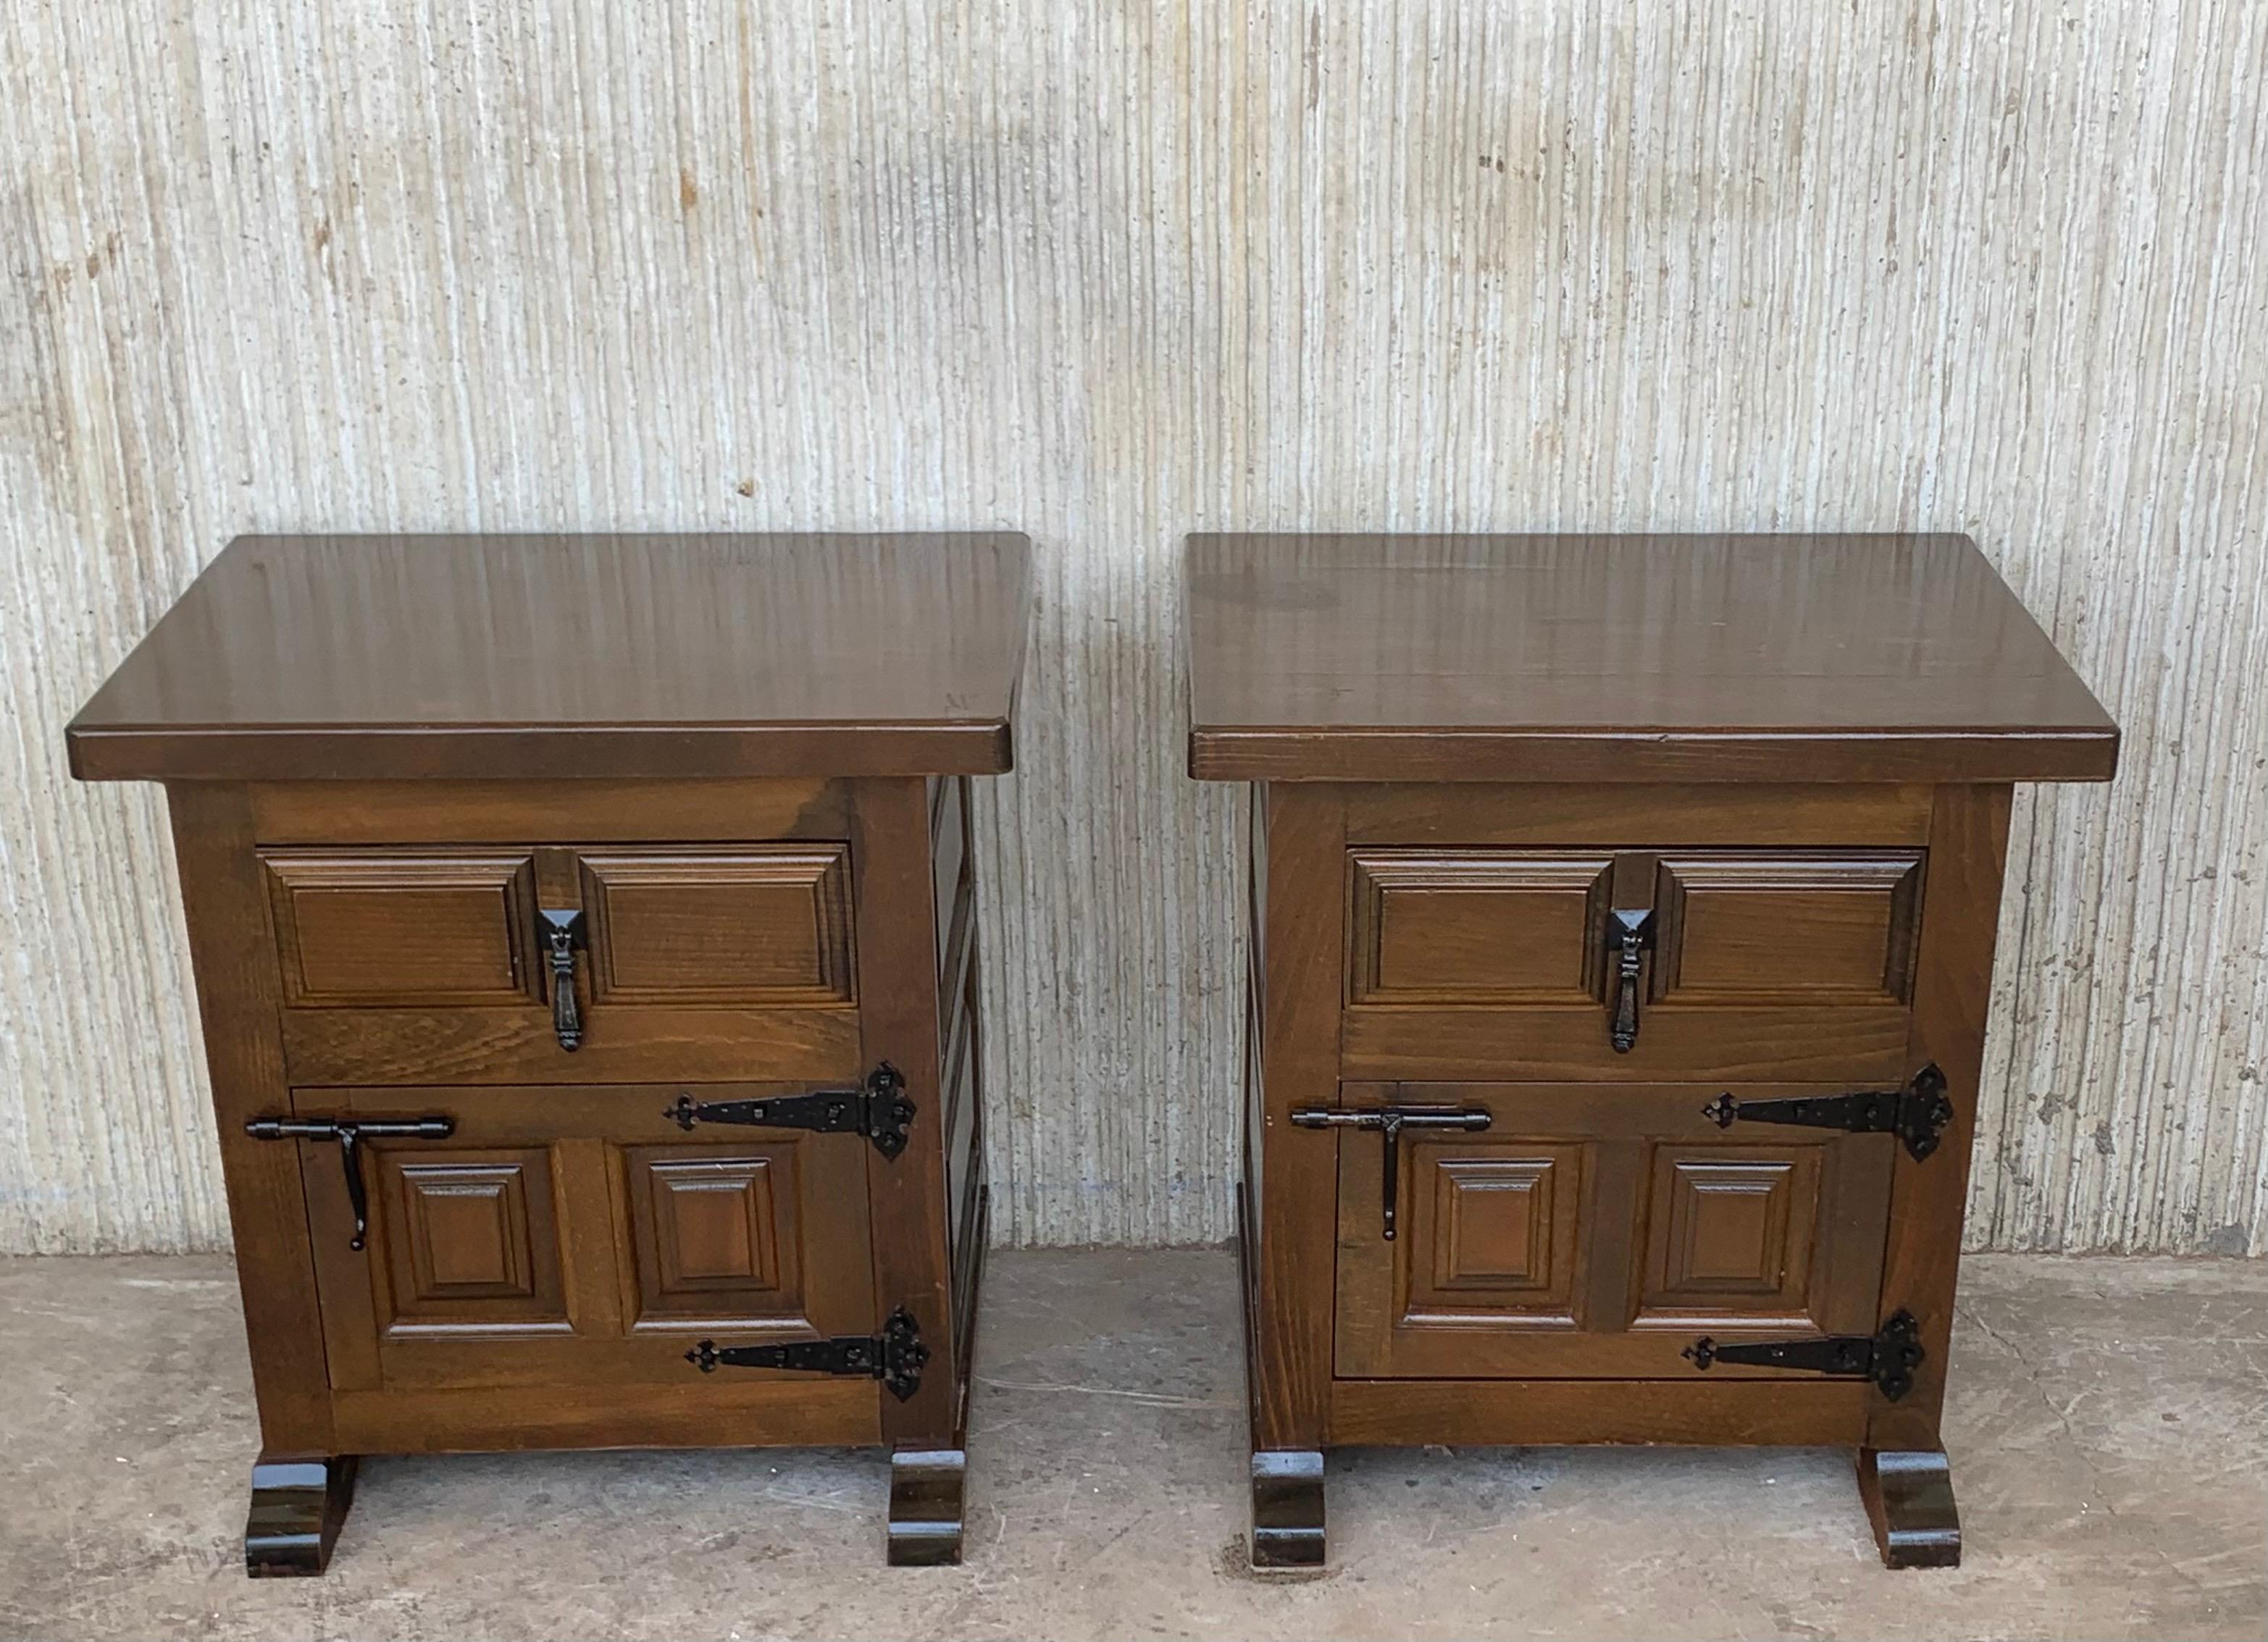 20th century pair of Spanish nightstands with one carved drawer, one door and iron hardware.
Beautiful tables that you can use like a night stands or side tables, end tables... or table lamp.